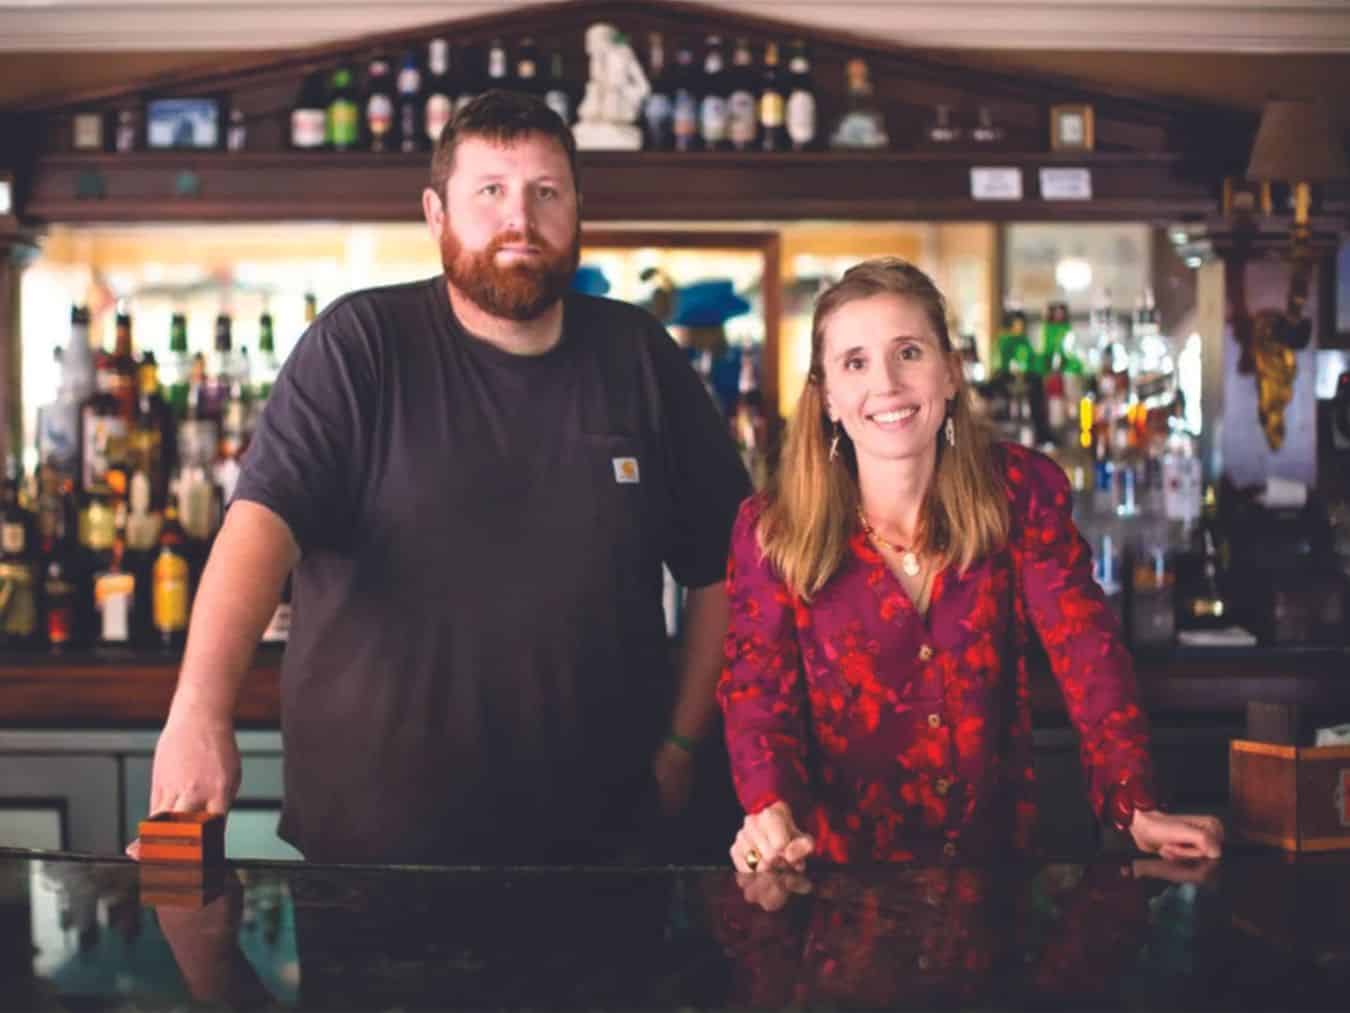 Brother and sister team Palmer Golson and Margaret Pearman now co-own and manage their family’s 40-year-old restaurant, Charlie’s Coastal Bistro